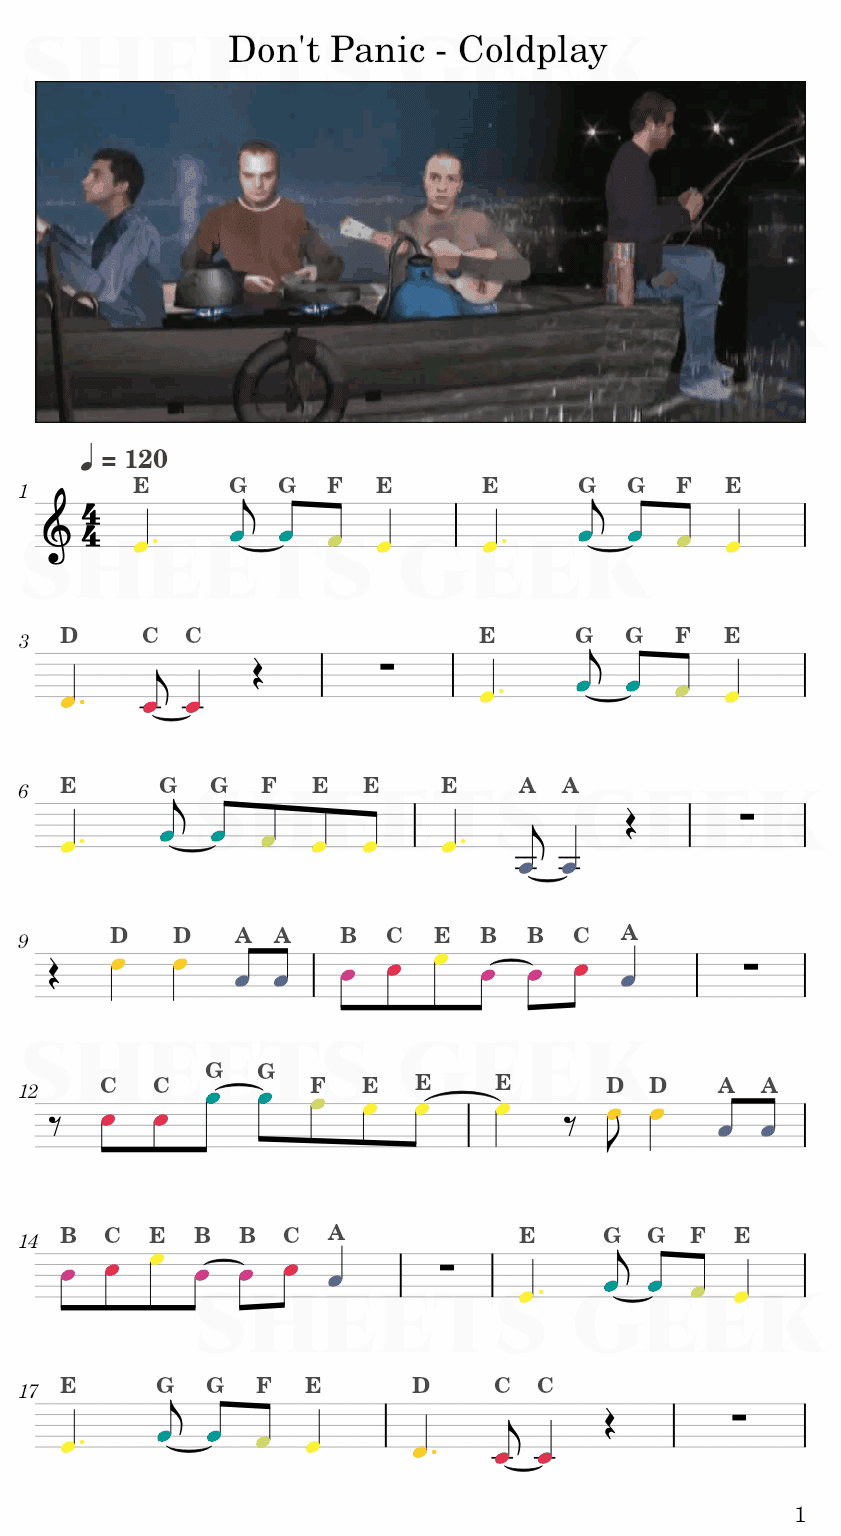 Don't Panic - Coldplay Easy Sheet Music Free for piano, keyboard, flute, violin, sax, cello page 1